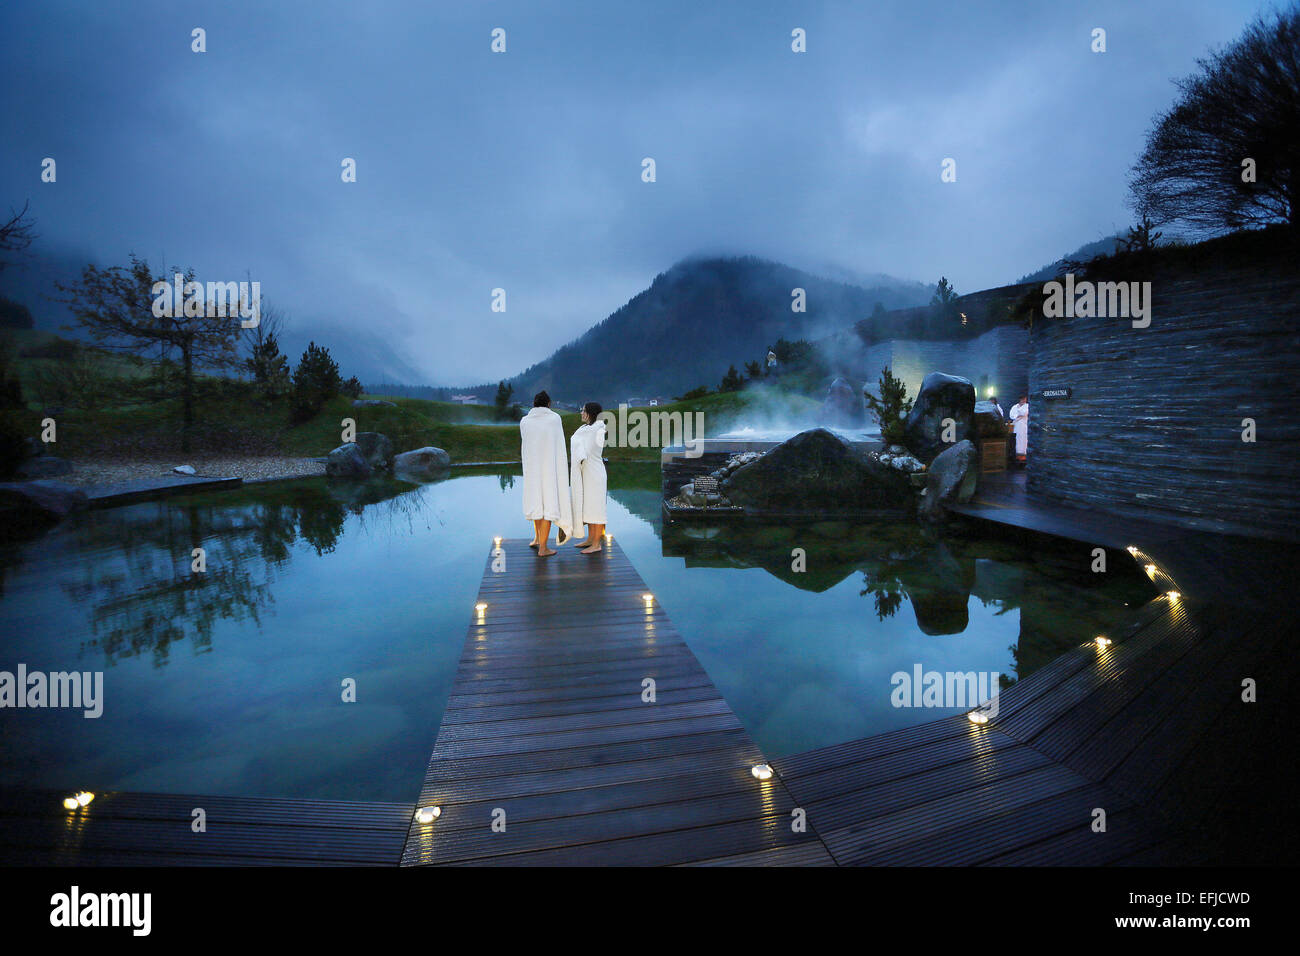 Hotel guests on a jetty at a natural source pond, Tannheim, Tannheim Valley, Tyrol, Austria Stock Photo